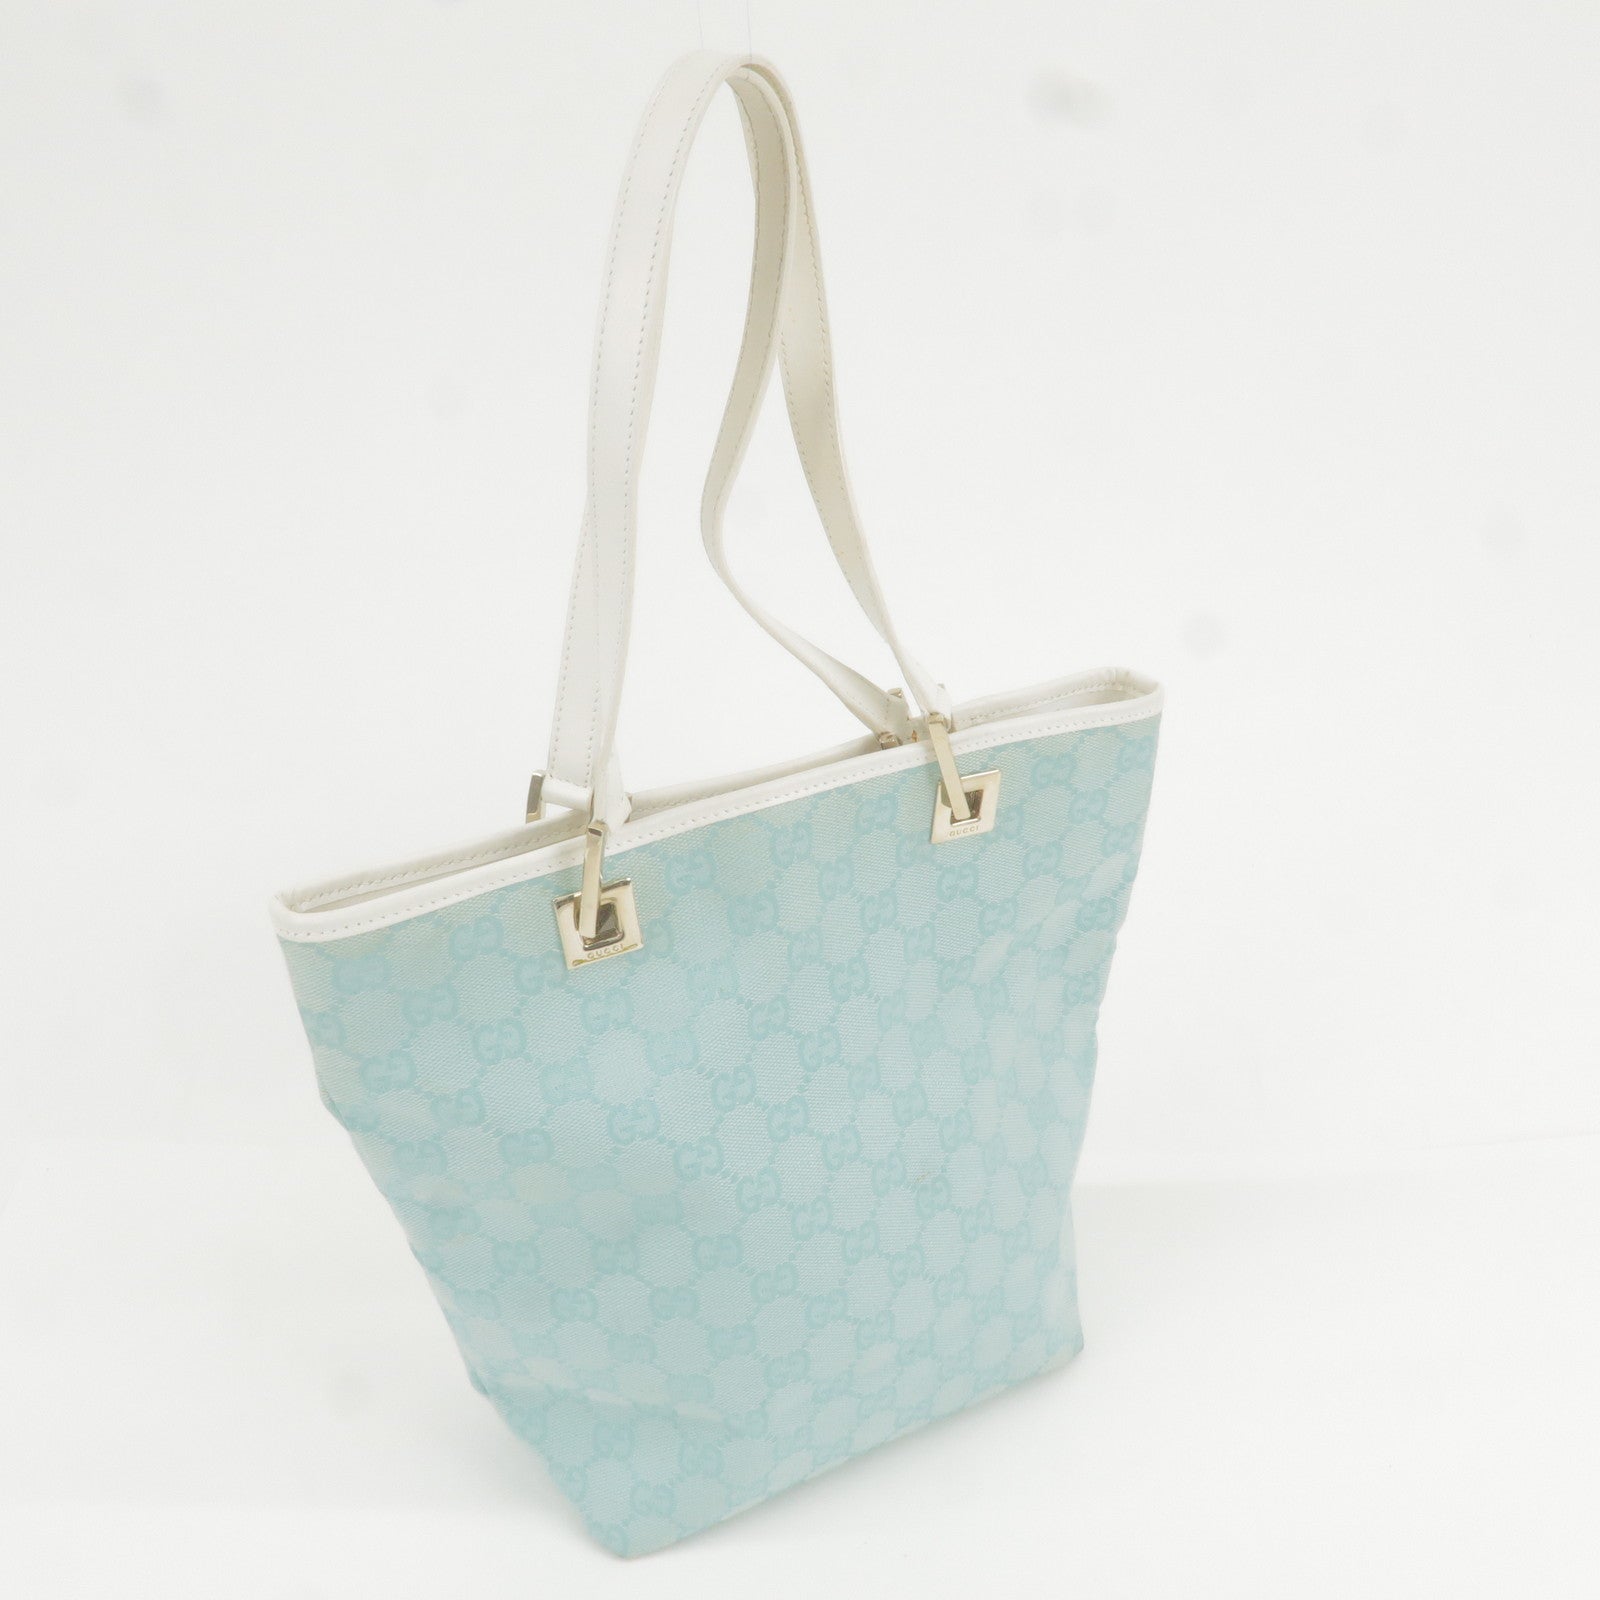 GUCCI-GG-Canvas-Leather-Tote-Bag-Light-Blue-White-002.1099 – dct-ep_vintage  luxury Store